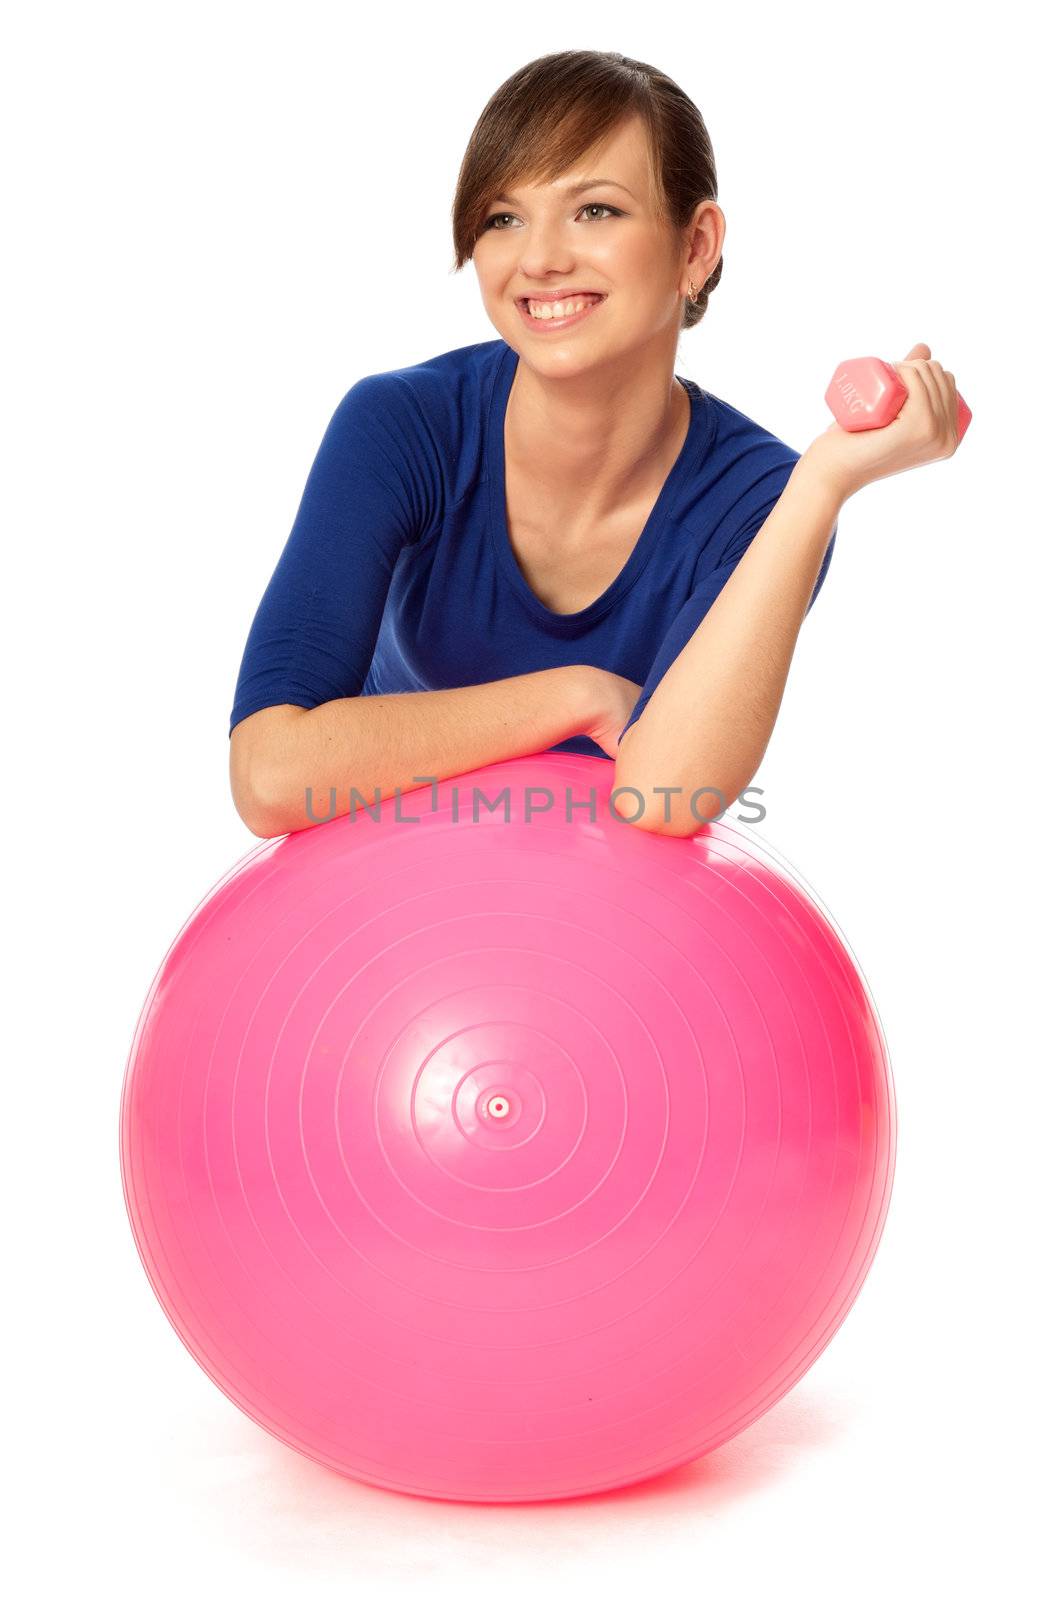 Instructor taking exercise class using ball and dumbbells at gym